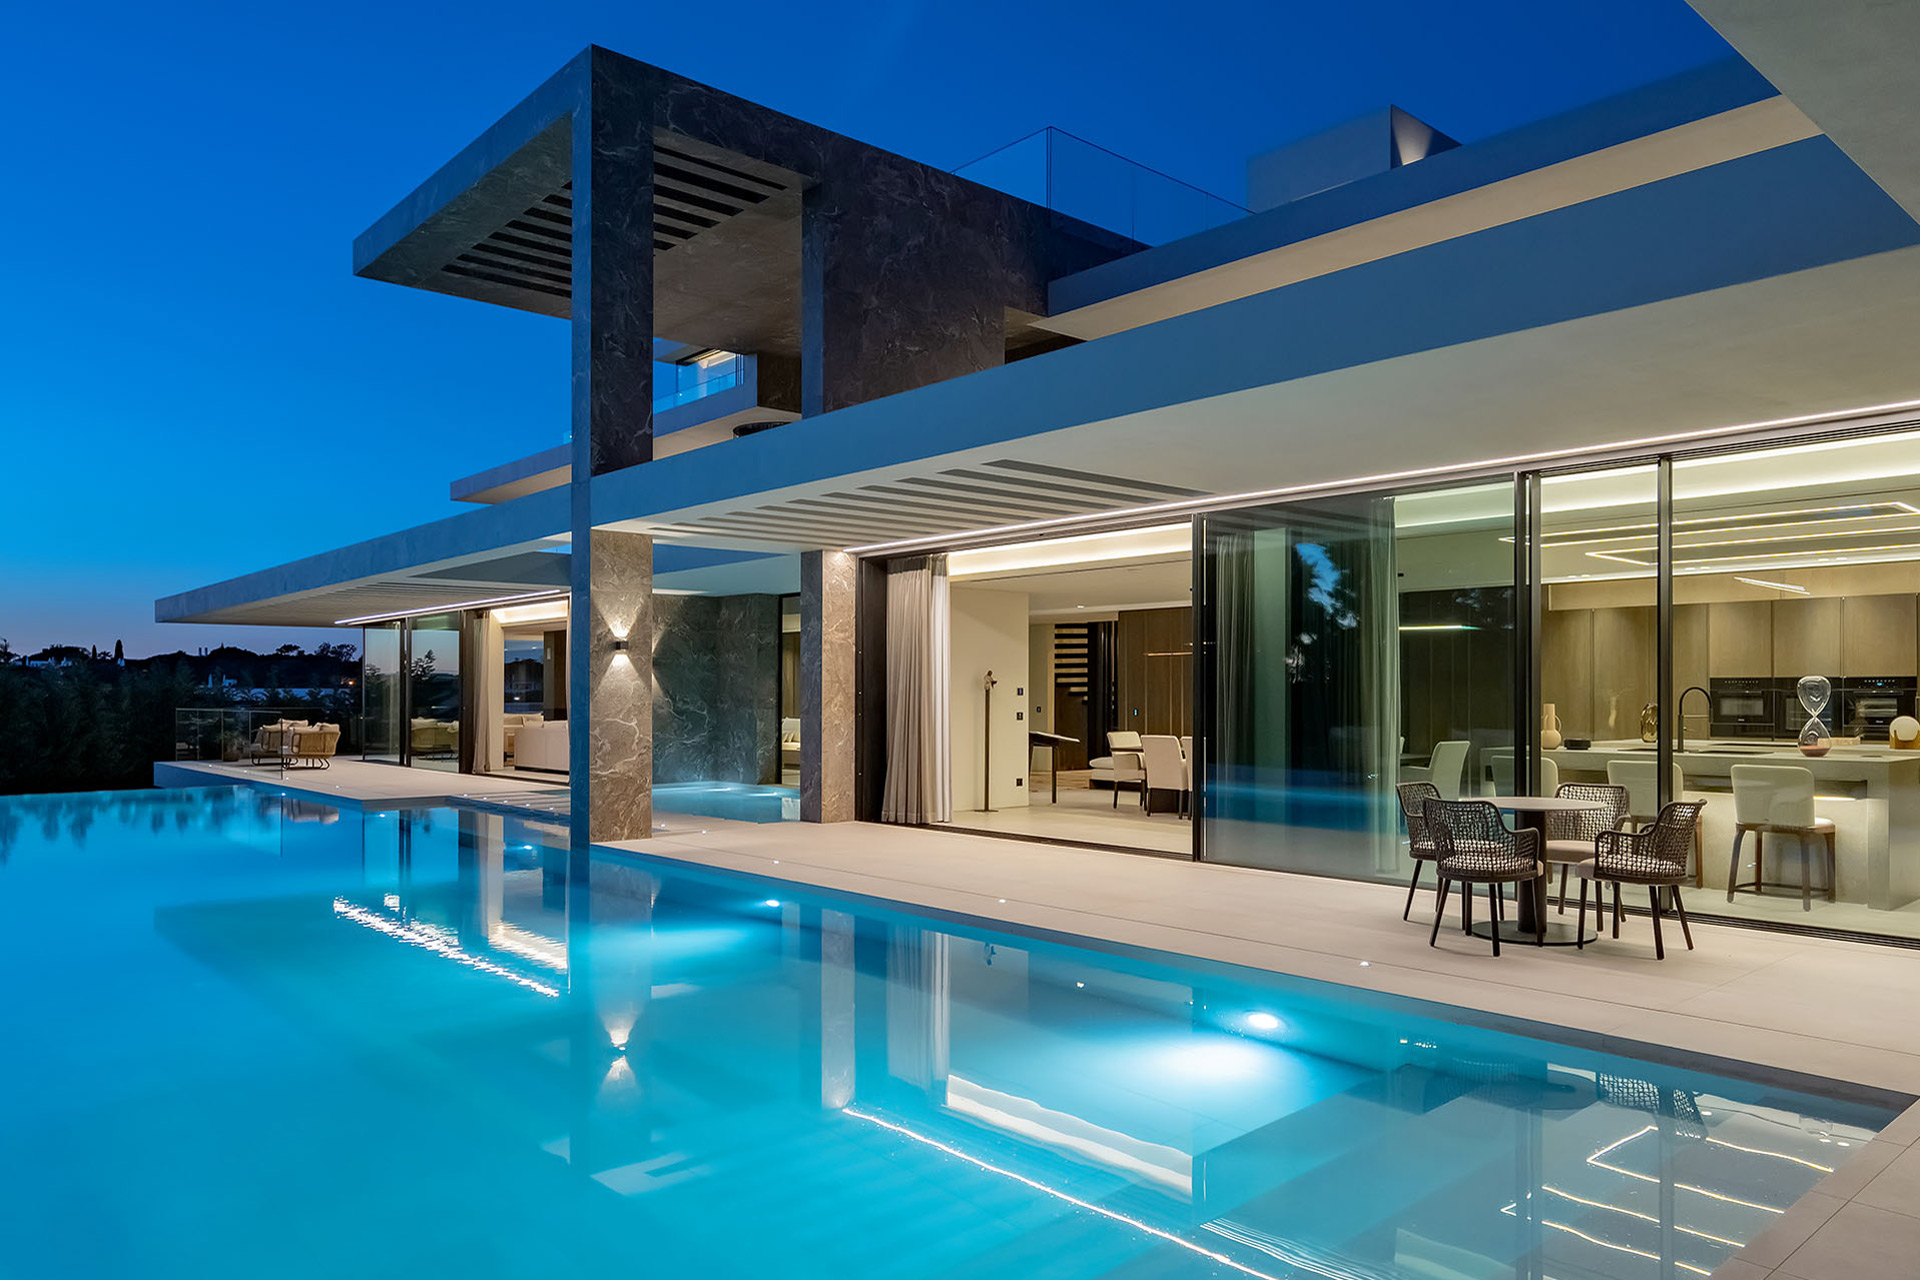 Large villa with infinity pool in front of modern kitchen with sliding doors.